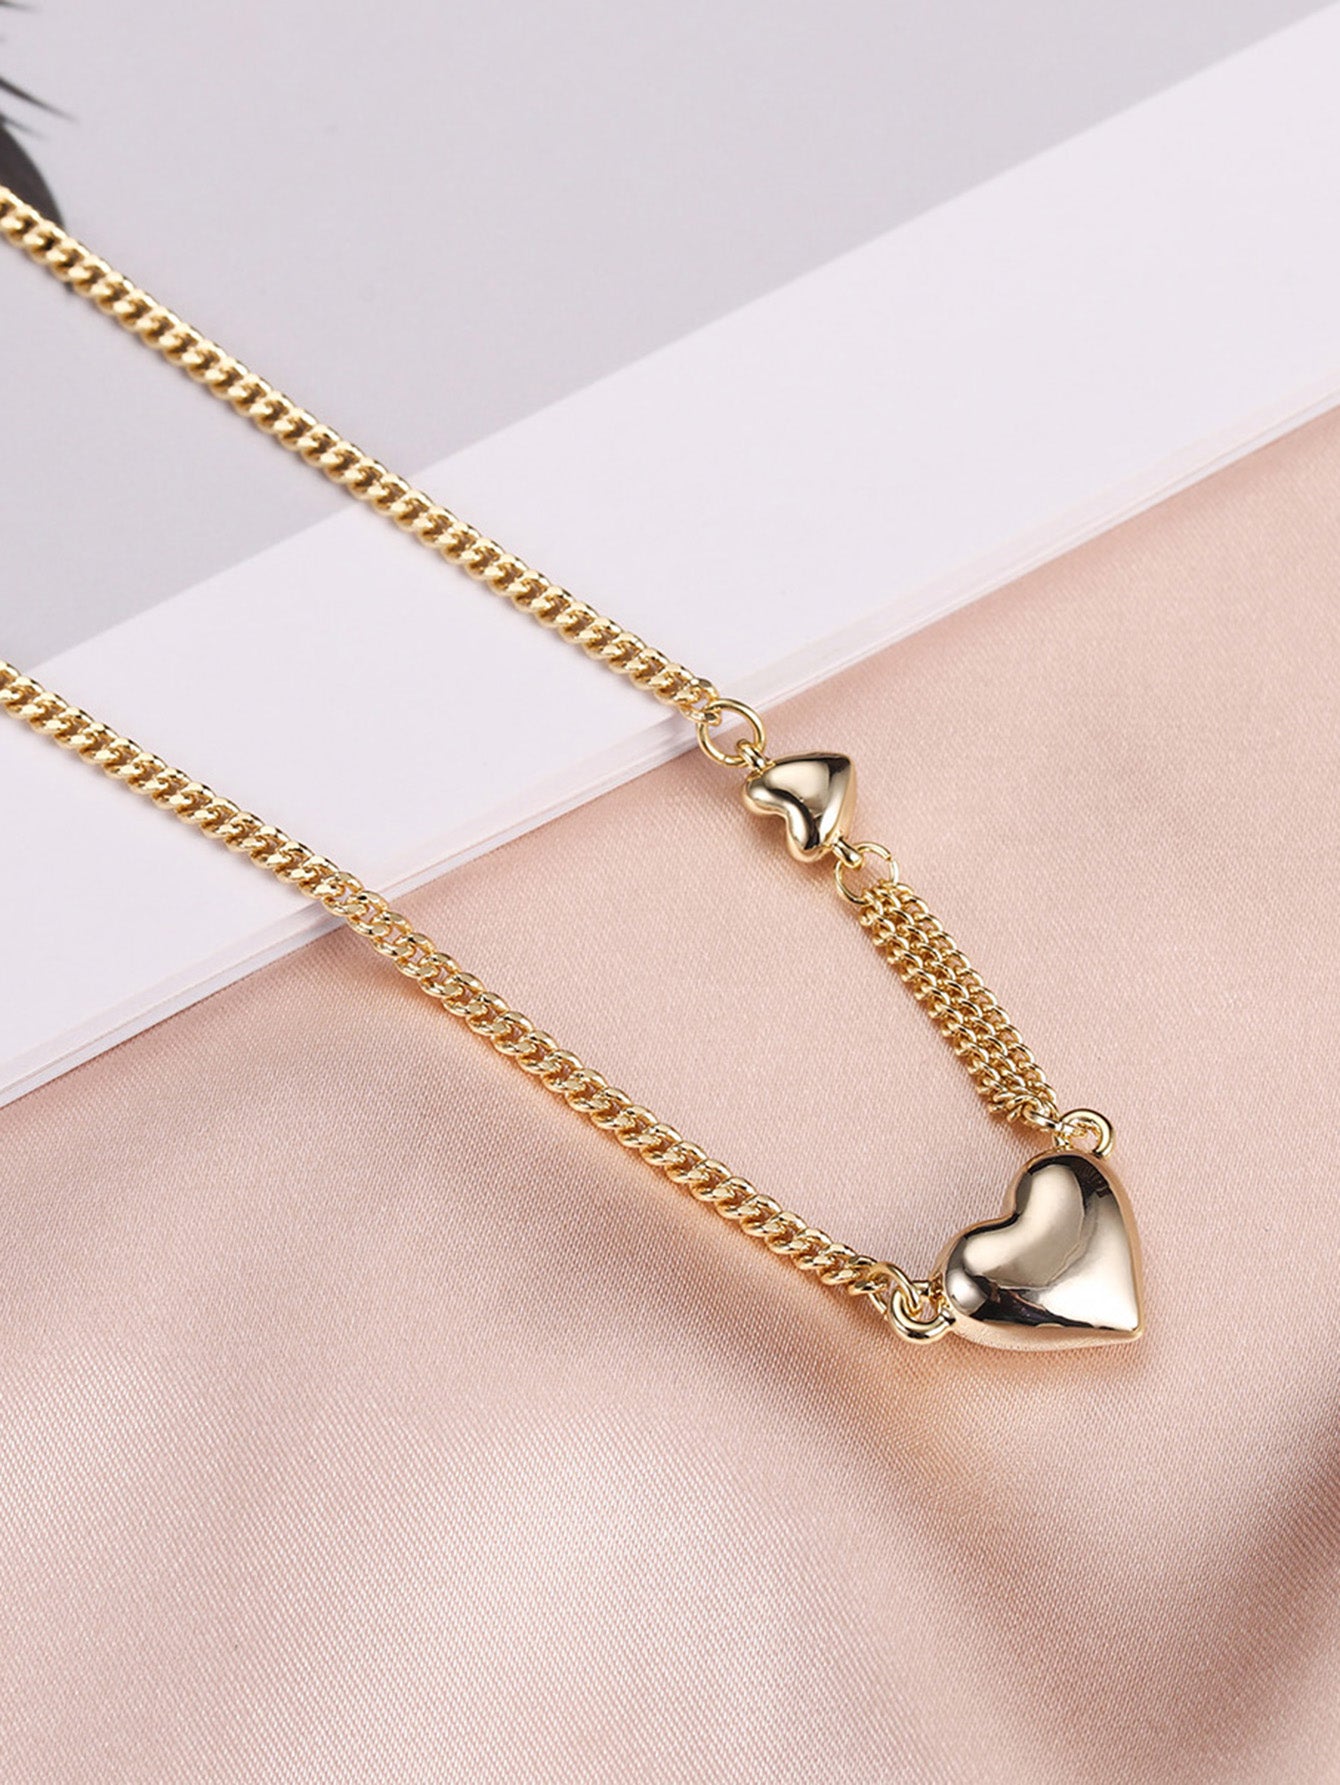 Romantic Simple Style Heart Shape Copper Plating 18k Gold Plated Necklace